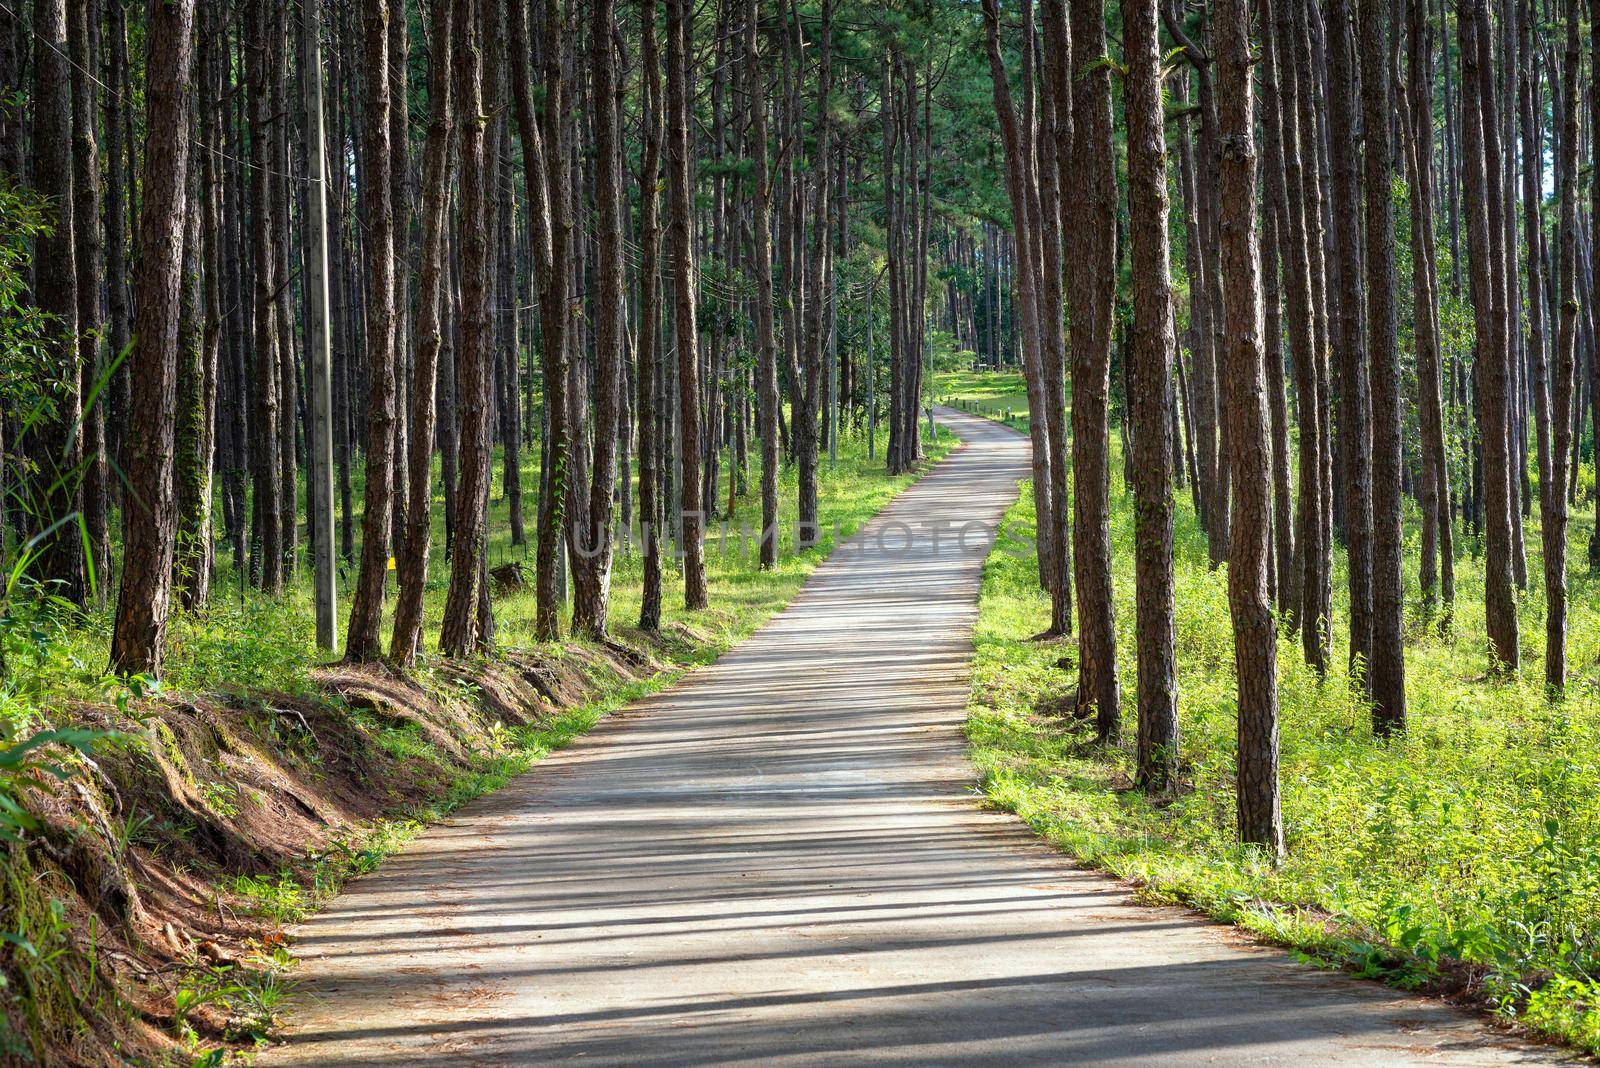 Beautiful Pathway along with nature pine trees with sunshine in summer season at rural fores by Nuamfolio